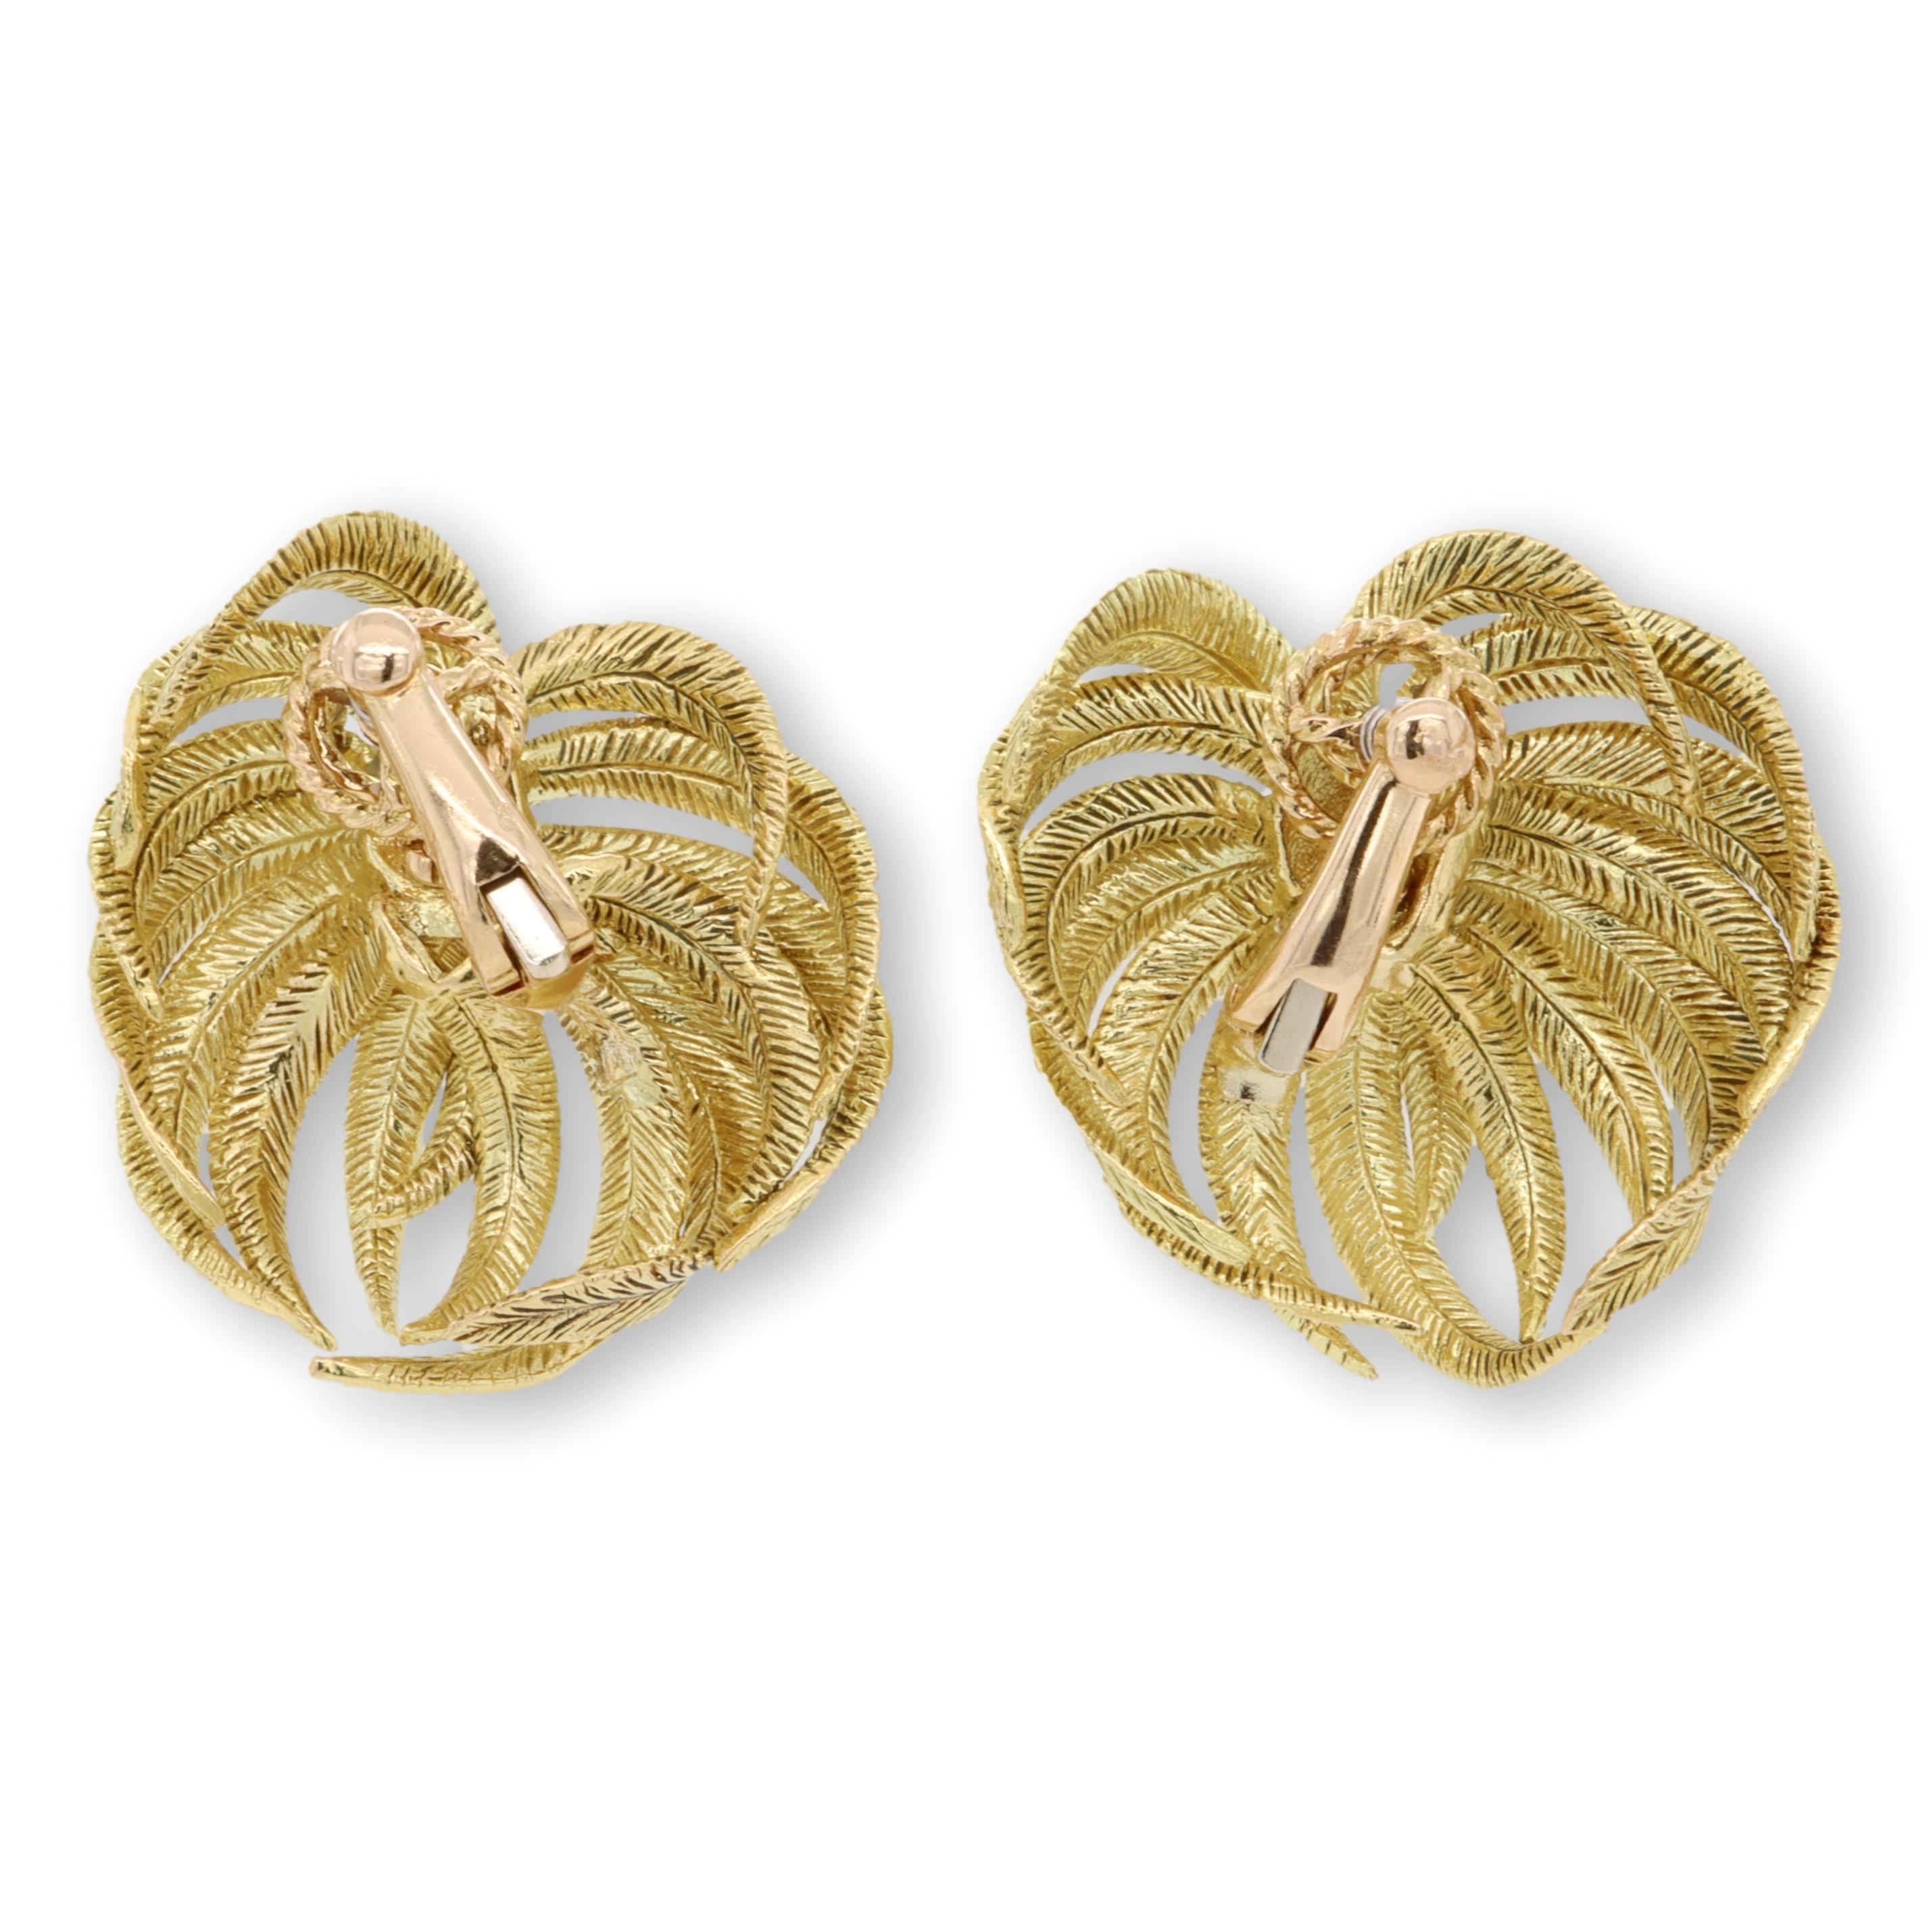 Vintage pair of beautifully hand made ear-clips finely crafted in 18 Karat yellow gold with a Palm Leaf Motif. The leaves have a fluted textured finish and the earrings have large handmade omega clip backs. The earrings have a nice heft and date